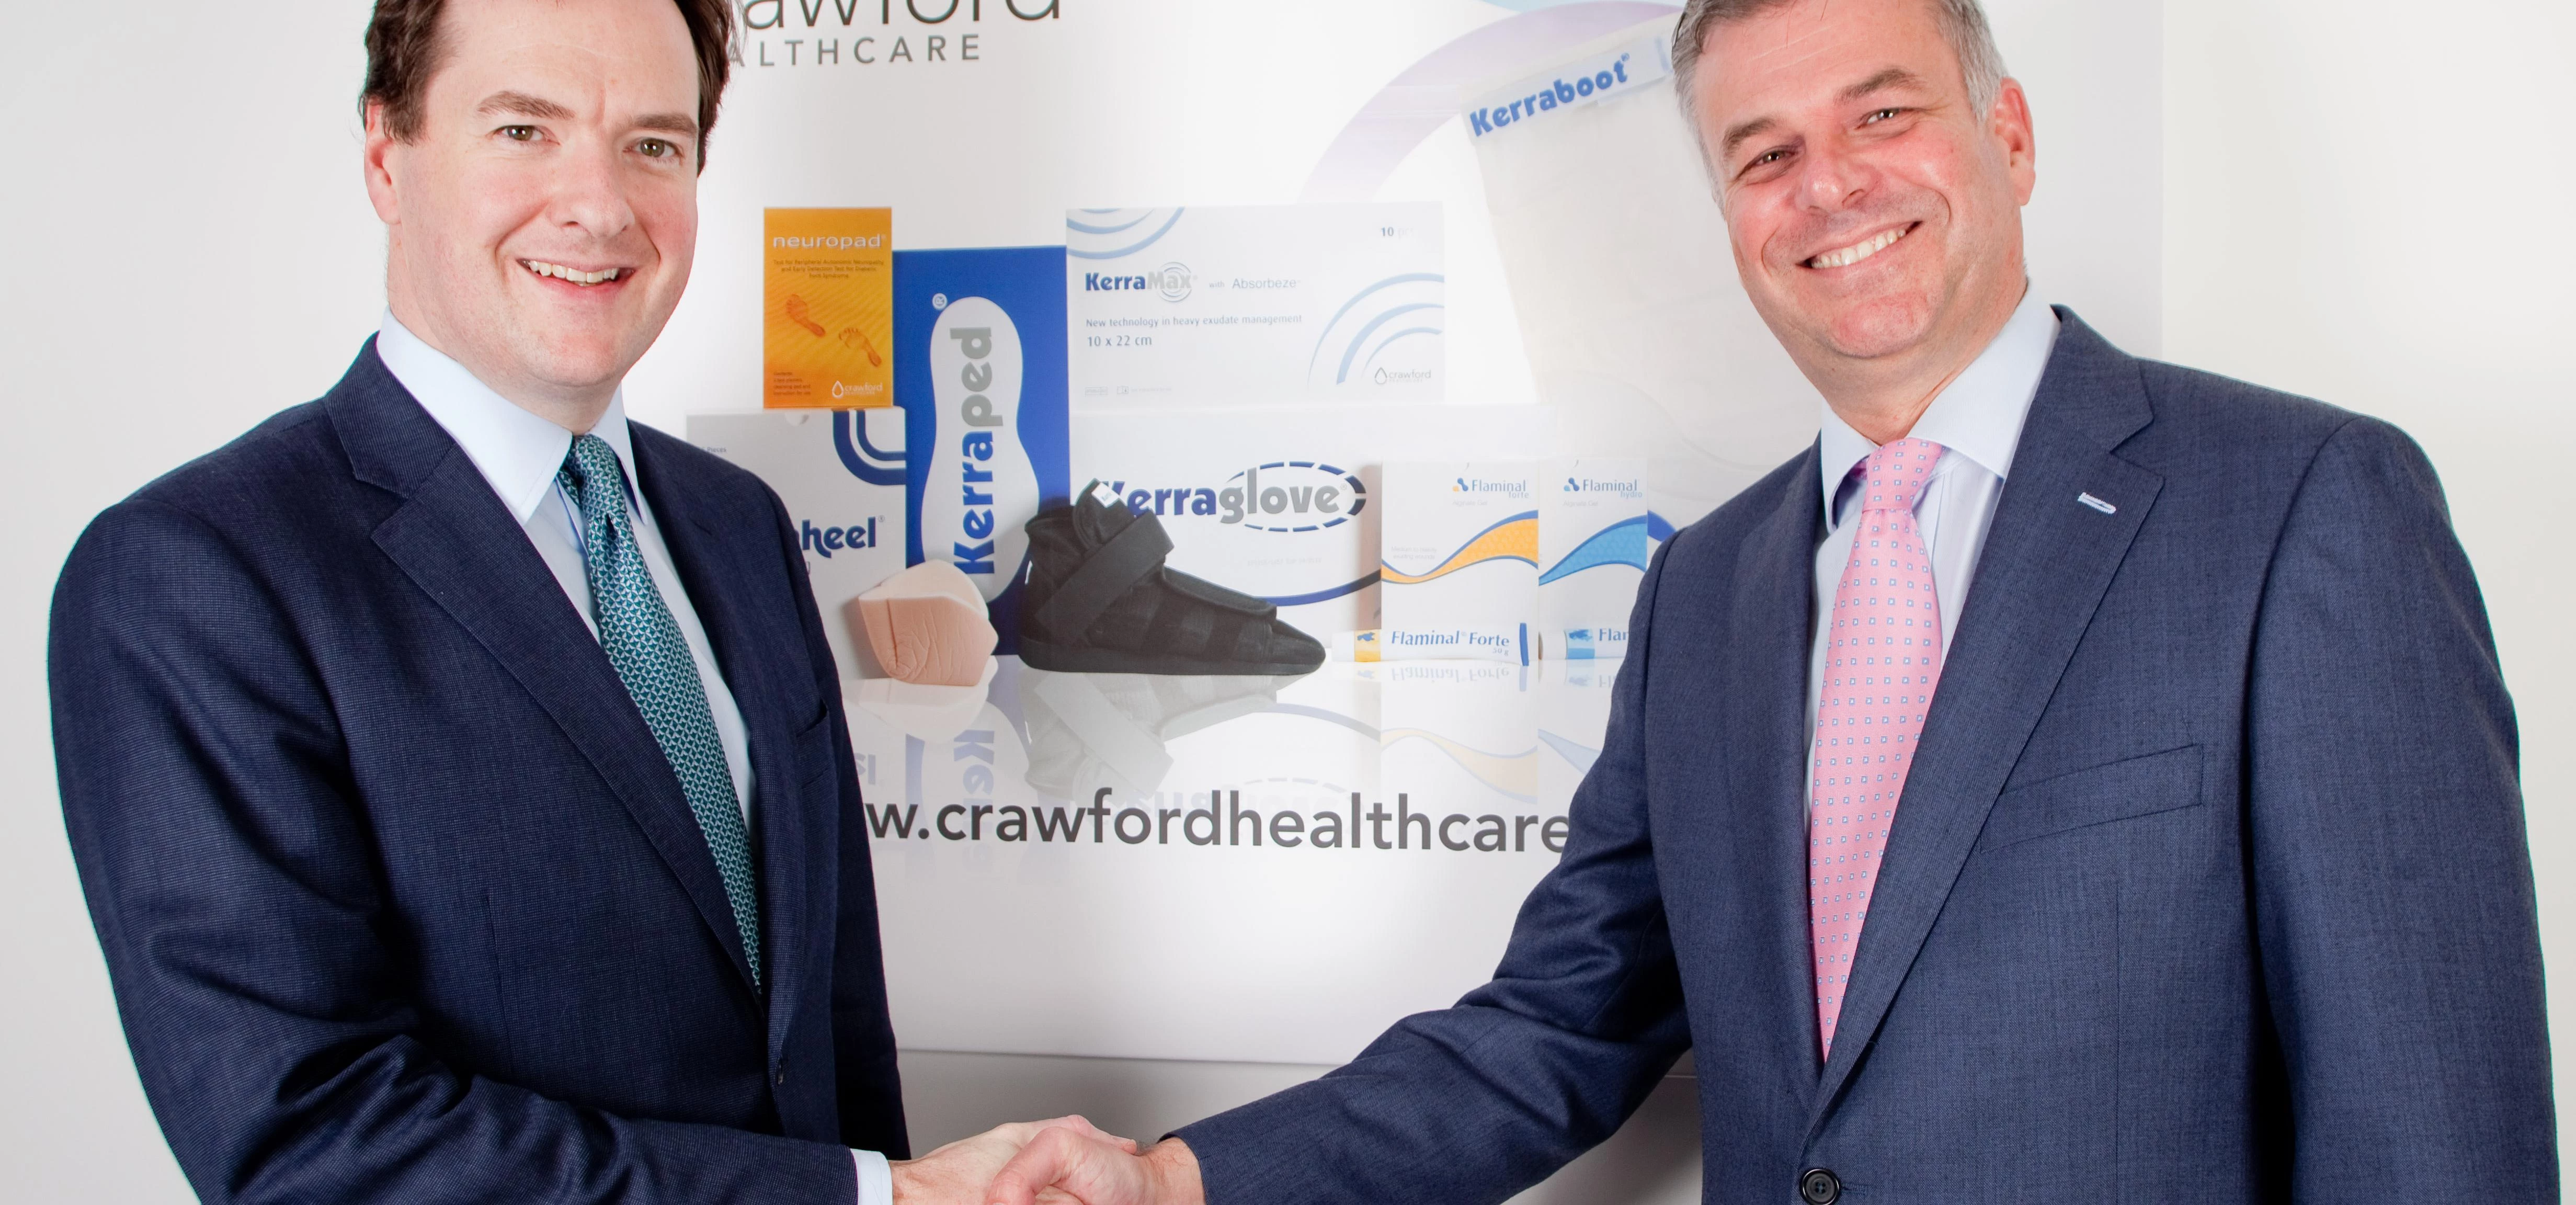 Crawford Healthcare CEO Richard Anderson (right) with Chancellor George Osborne